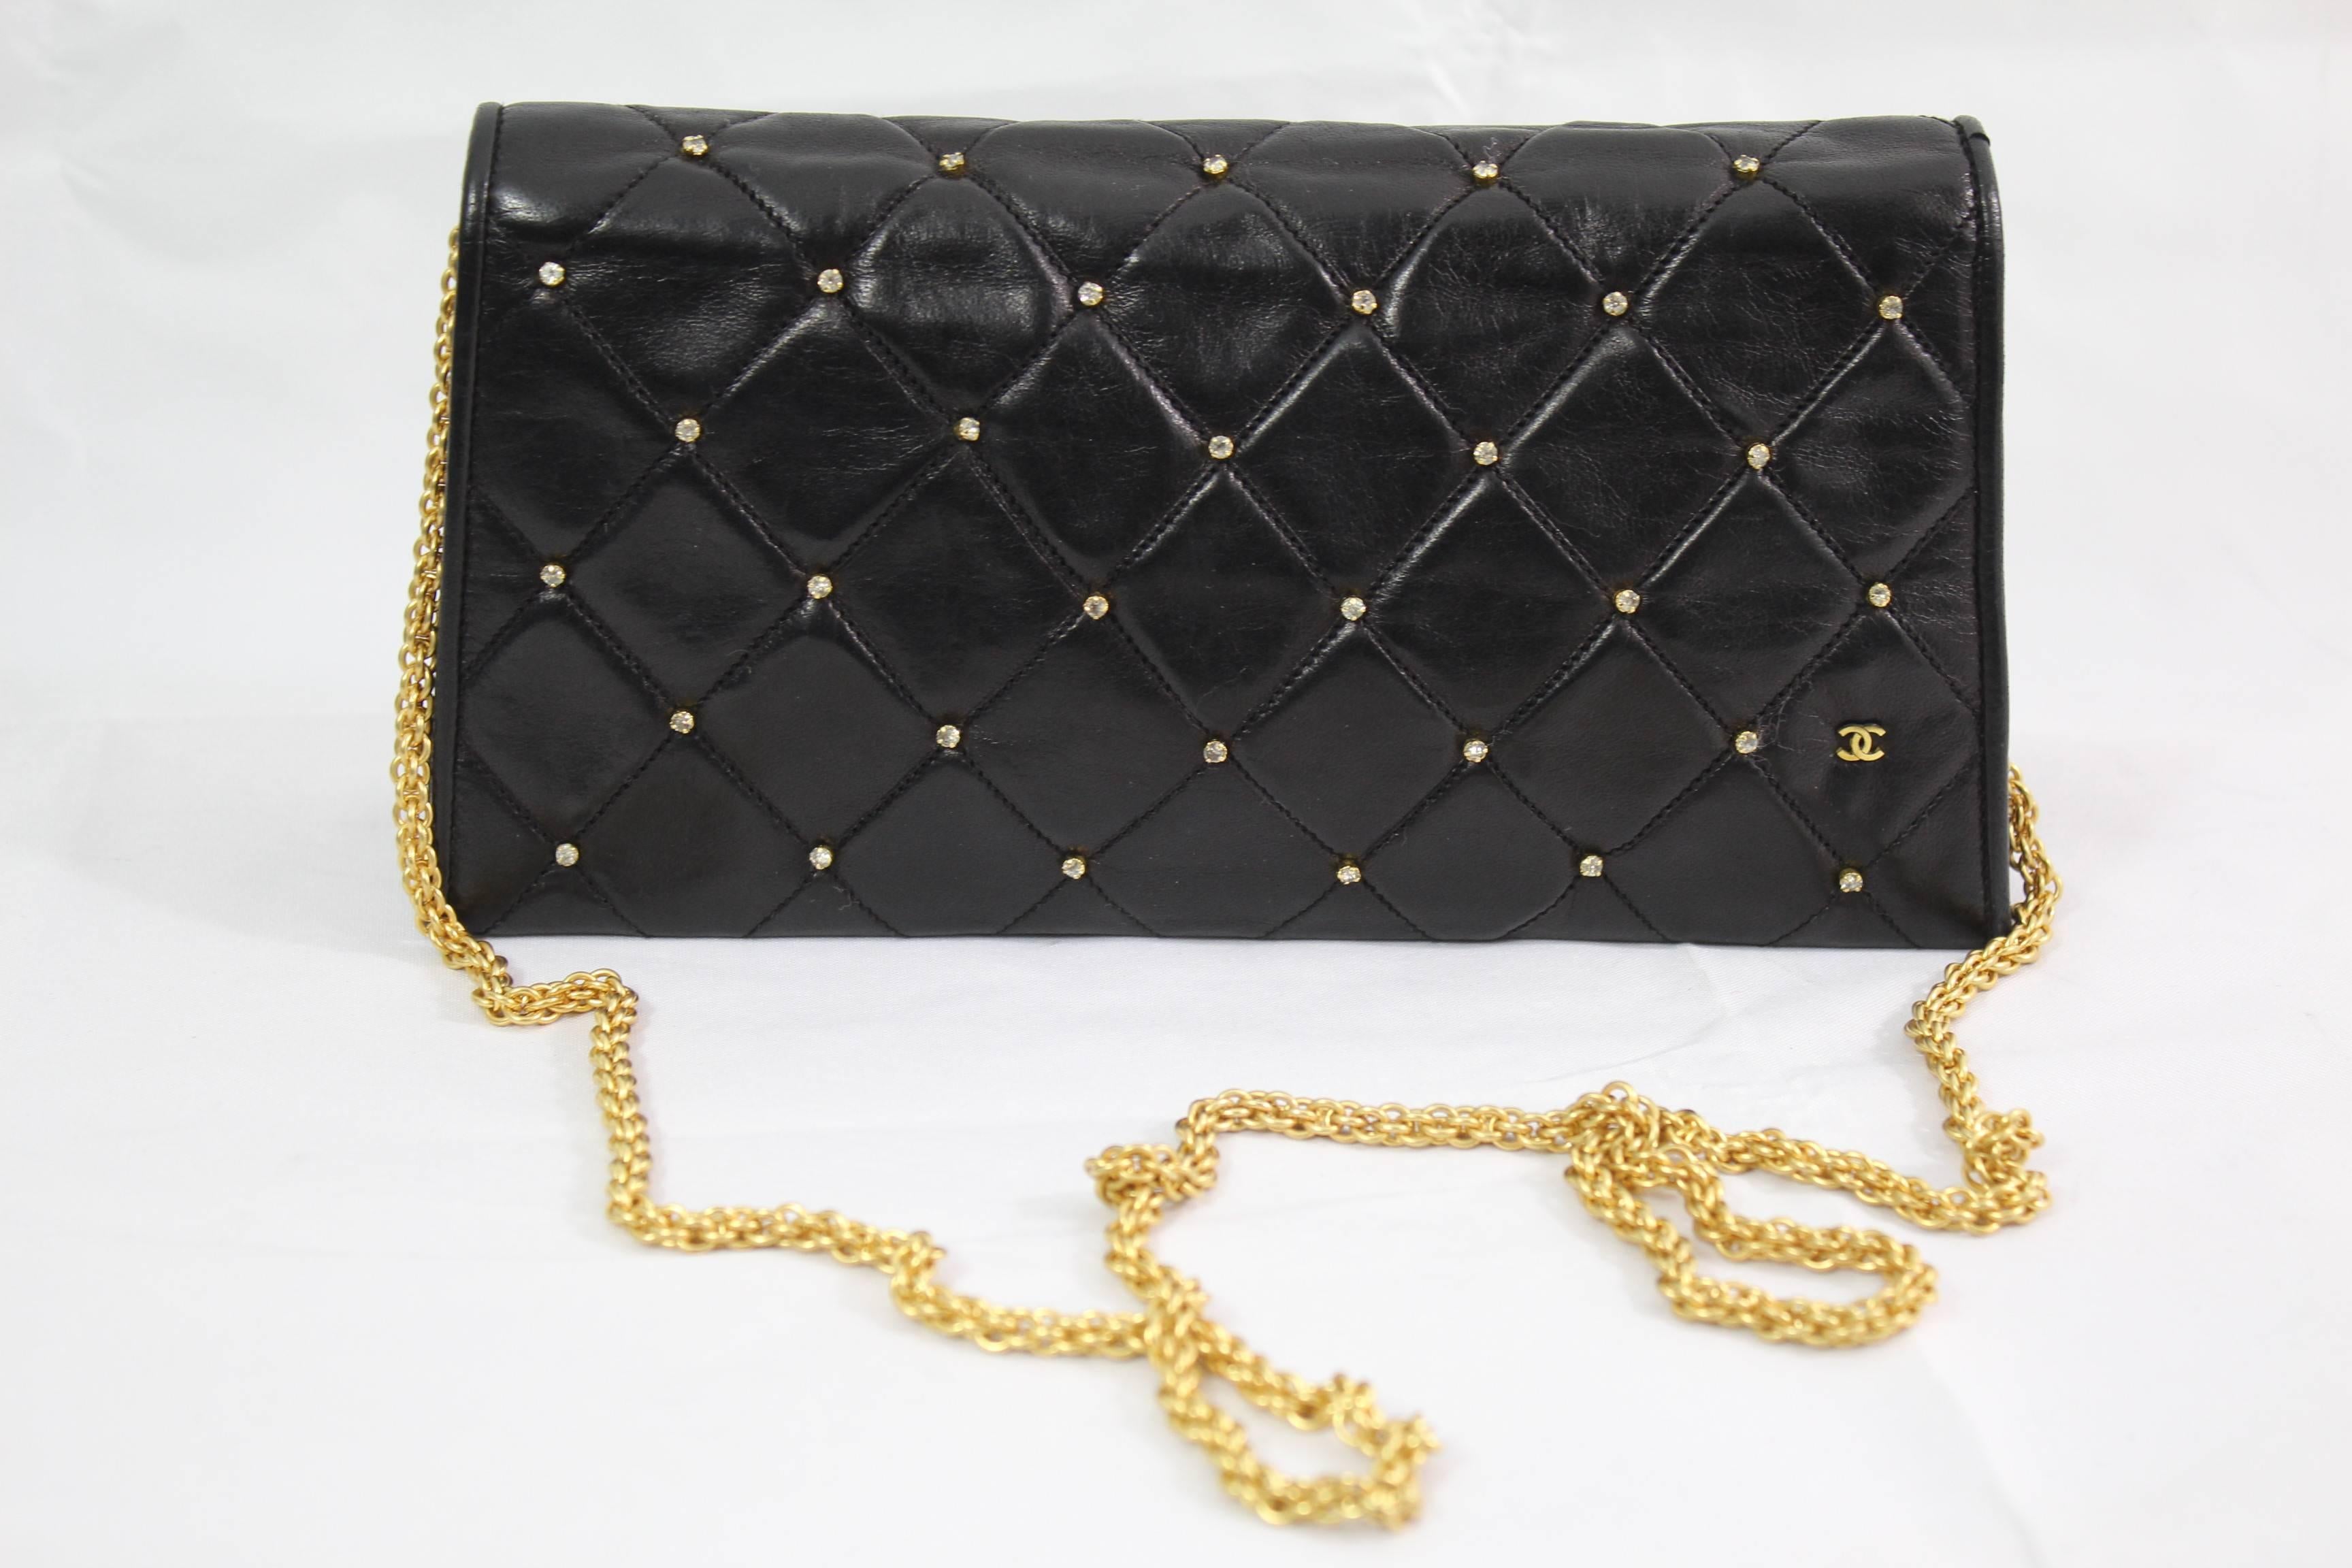 Chanel Vintage bag in Lambskin Leather and golden hardware.

Swarovski crystals in the leather

Really good condition

Chain in really good cndition

No hologram cause bag from before 1985